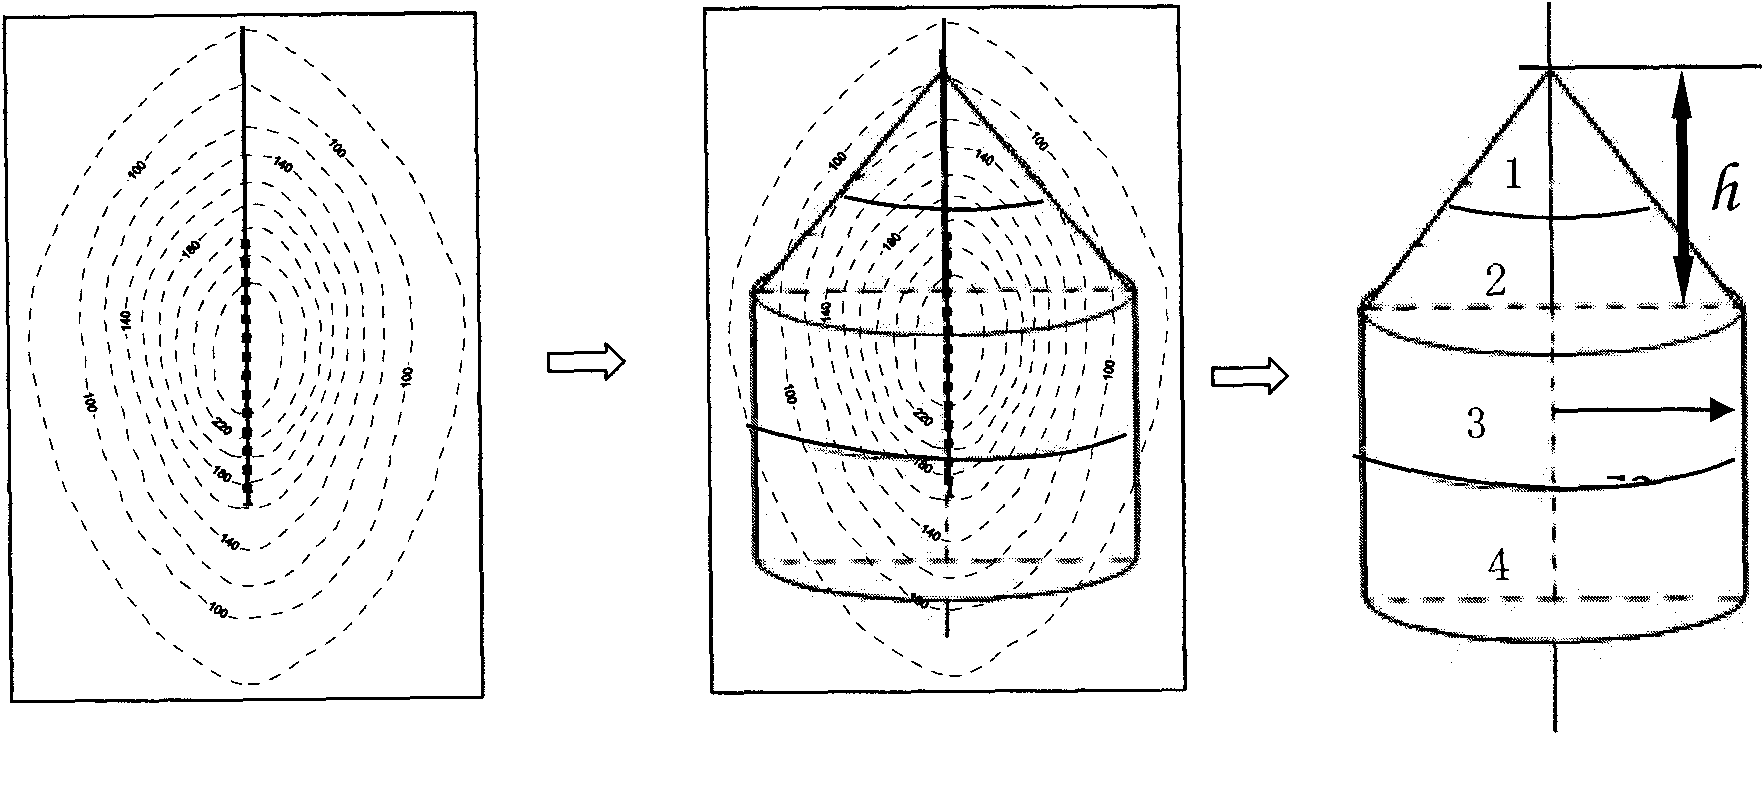 Method for improving recovery ratio of thick-layer massive thickened oil by utilizing subsection fireflooding exploitation